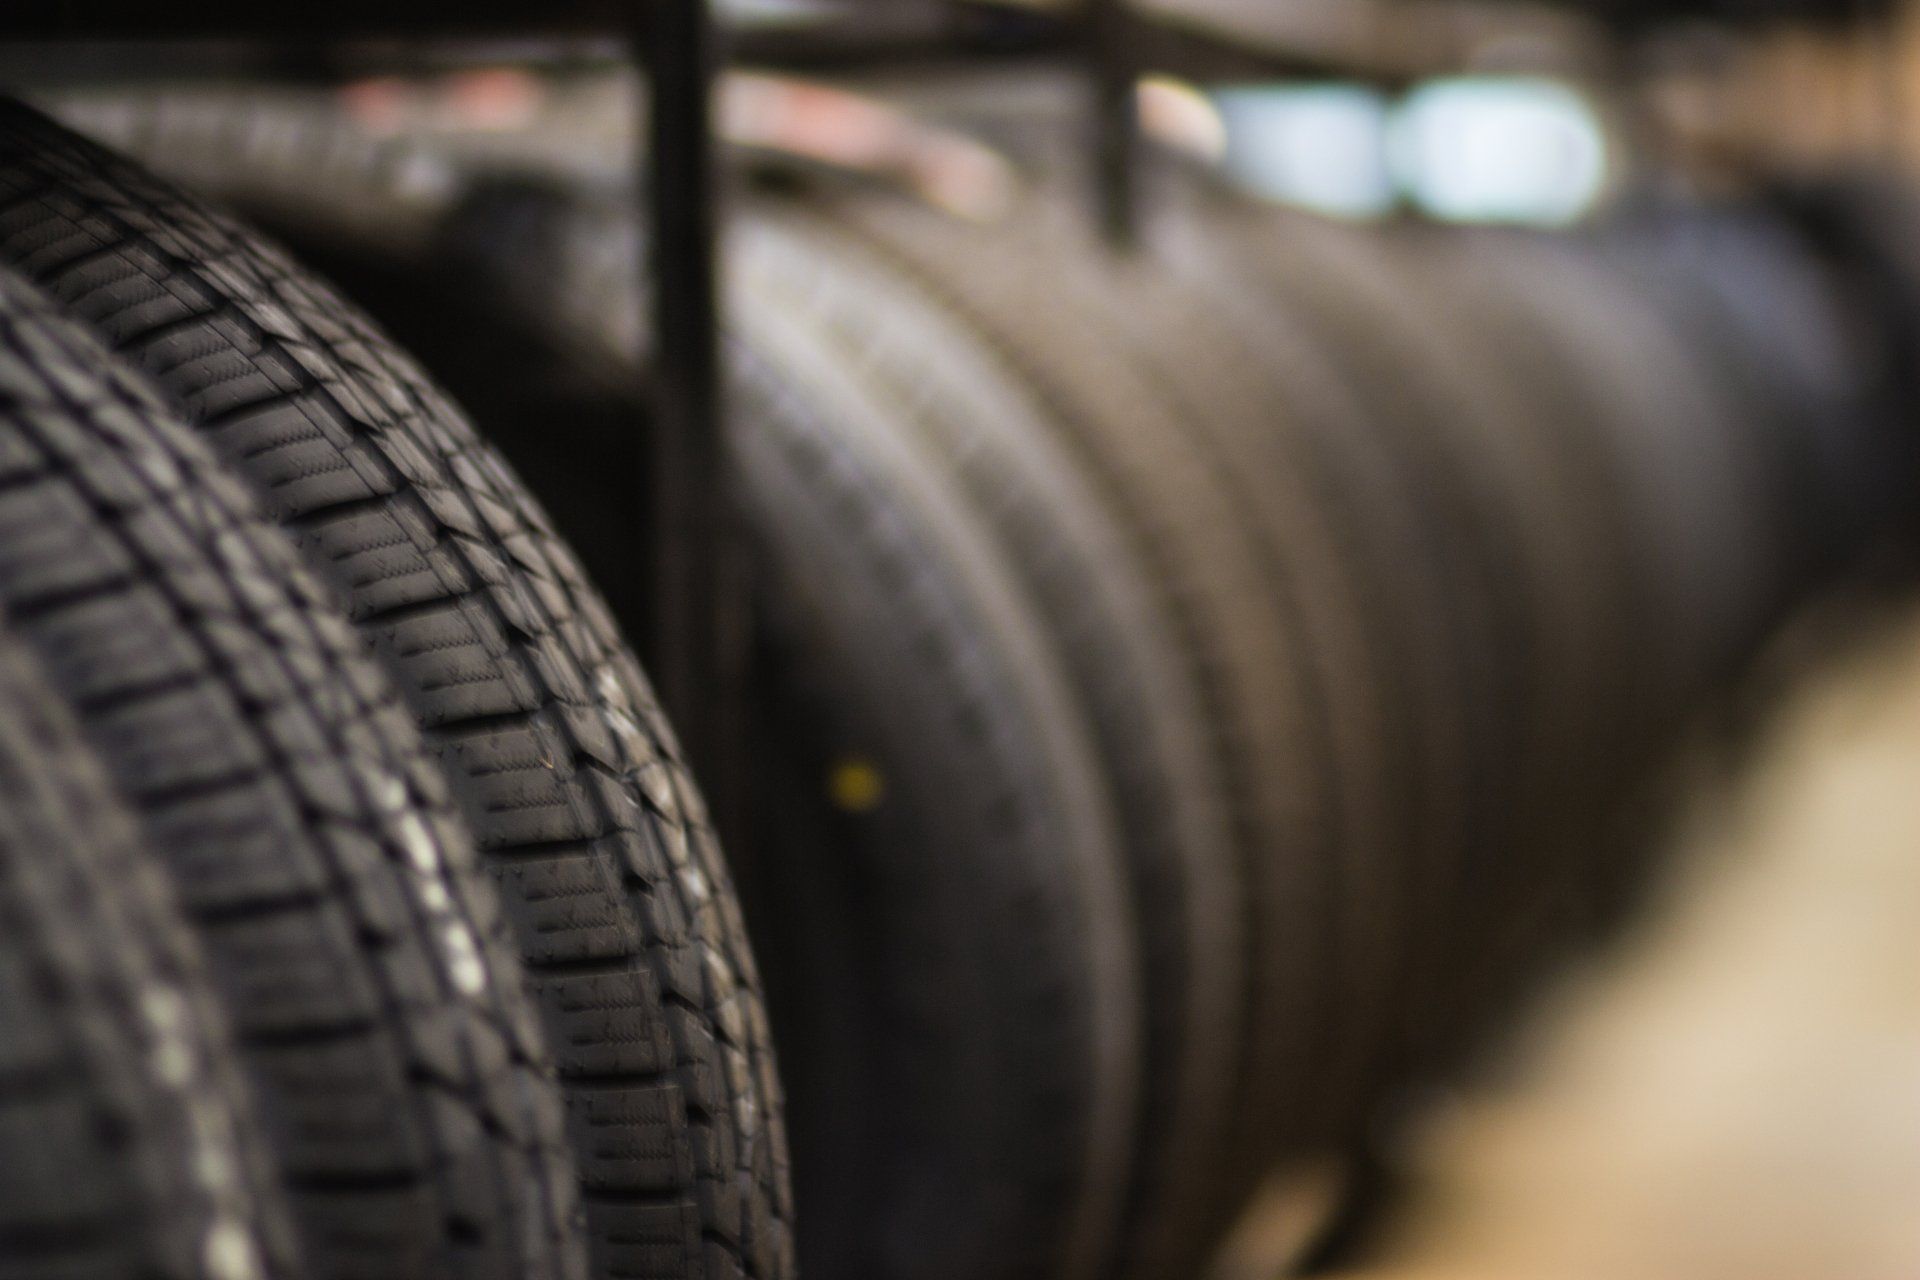 Shop for tires at Friendly City Tire Pros in New Albany, MS